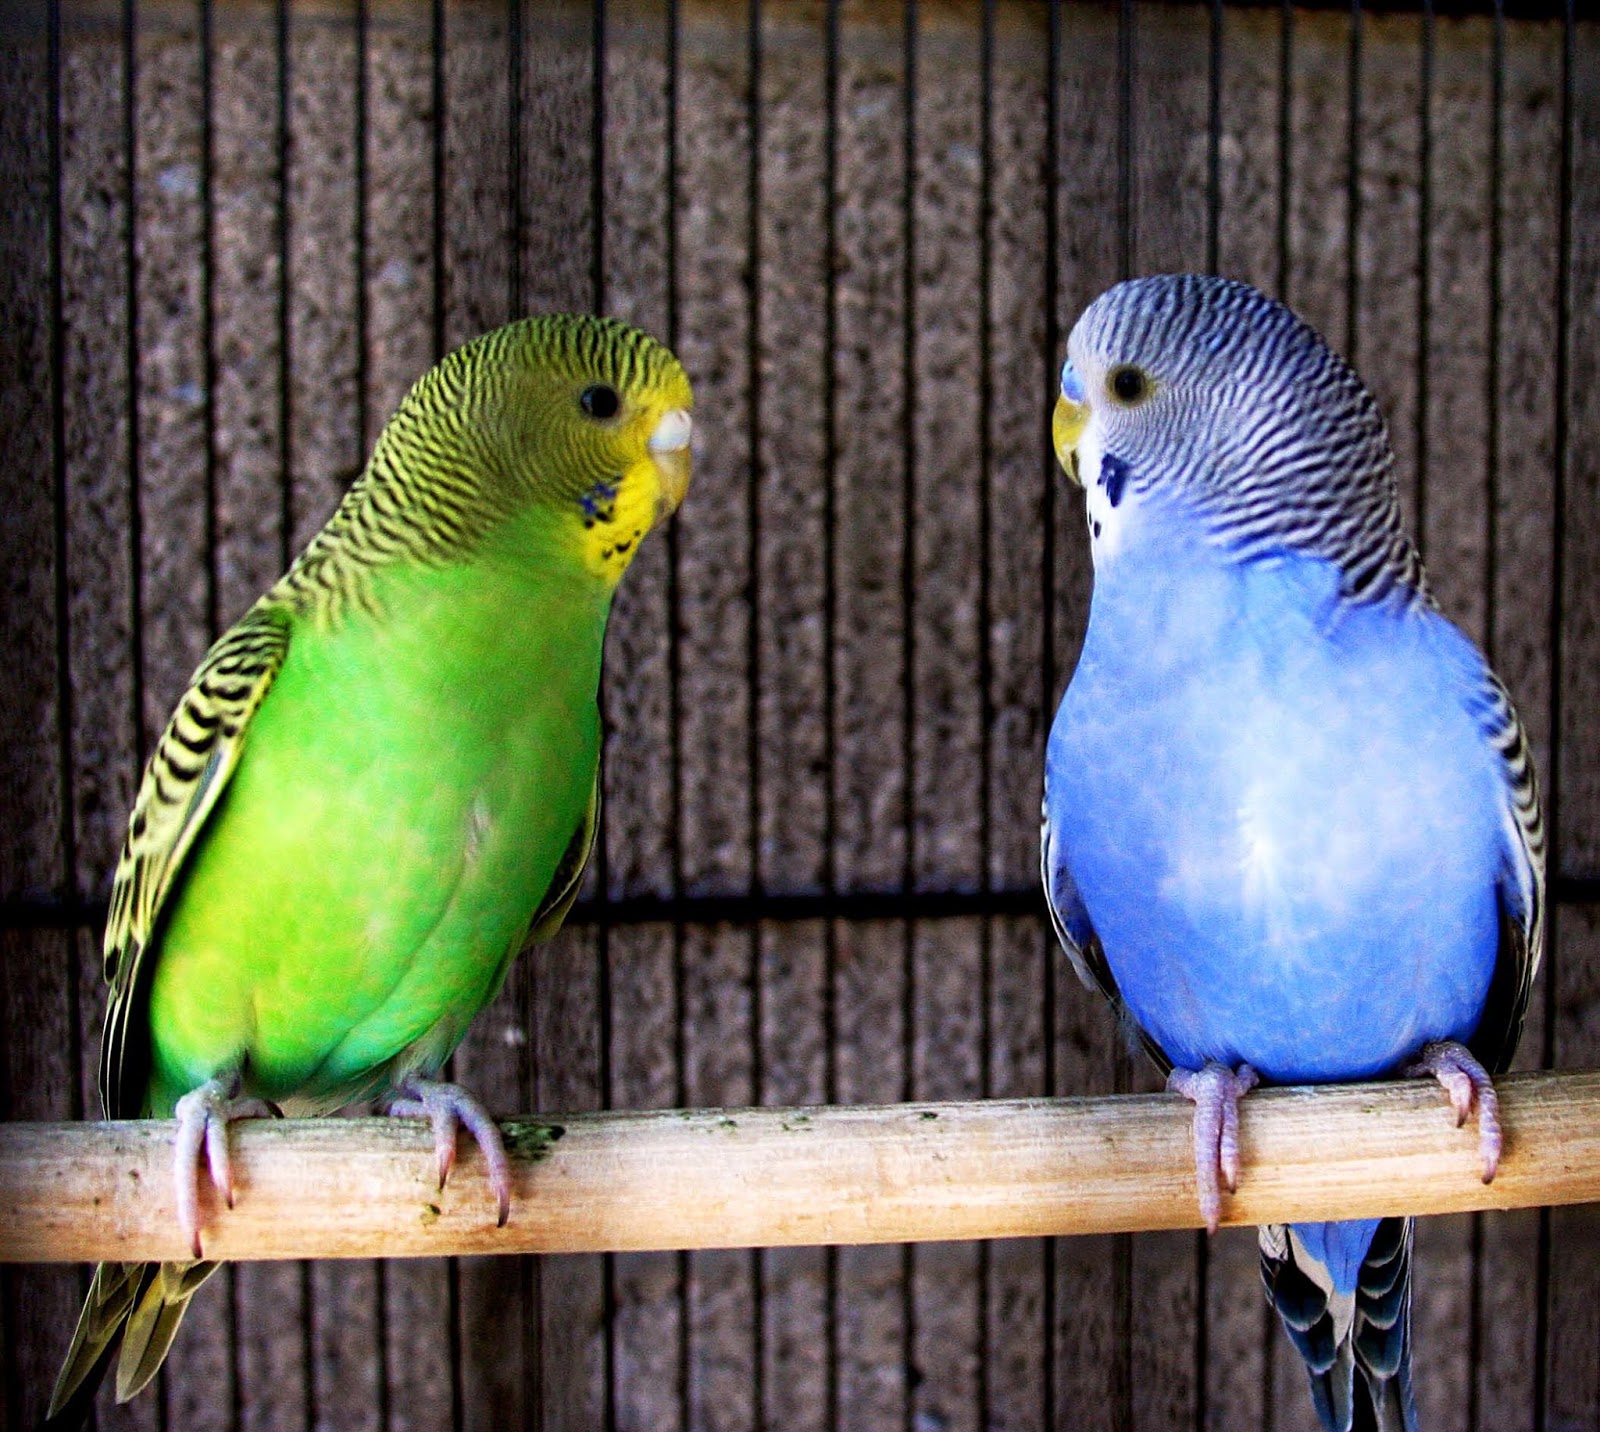 PETS PARADISO: First Steps In Training Your Parakeet To Talk